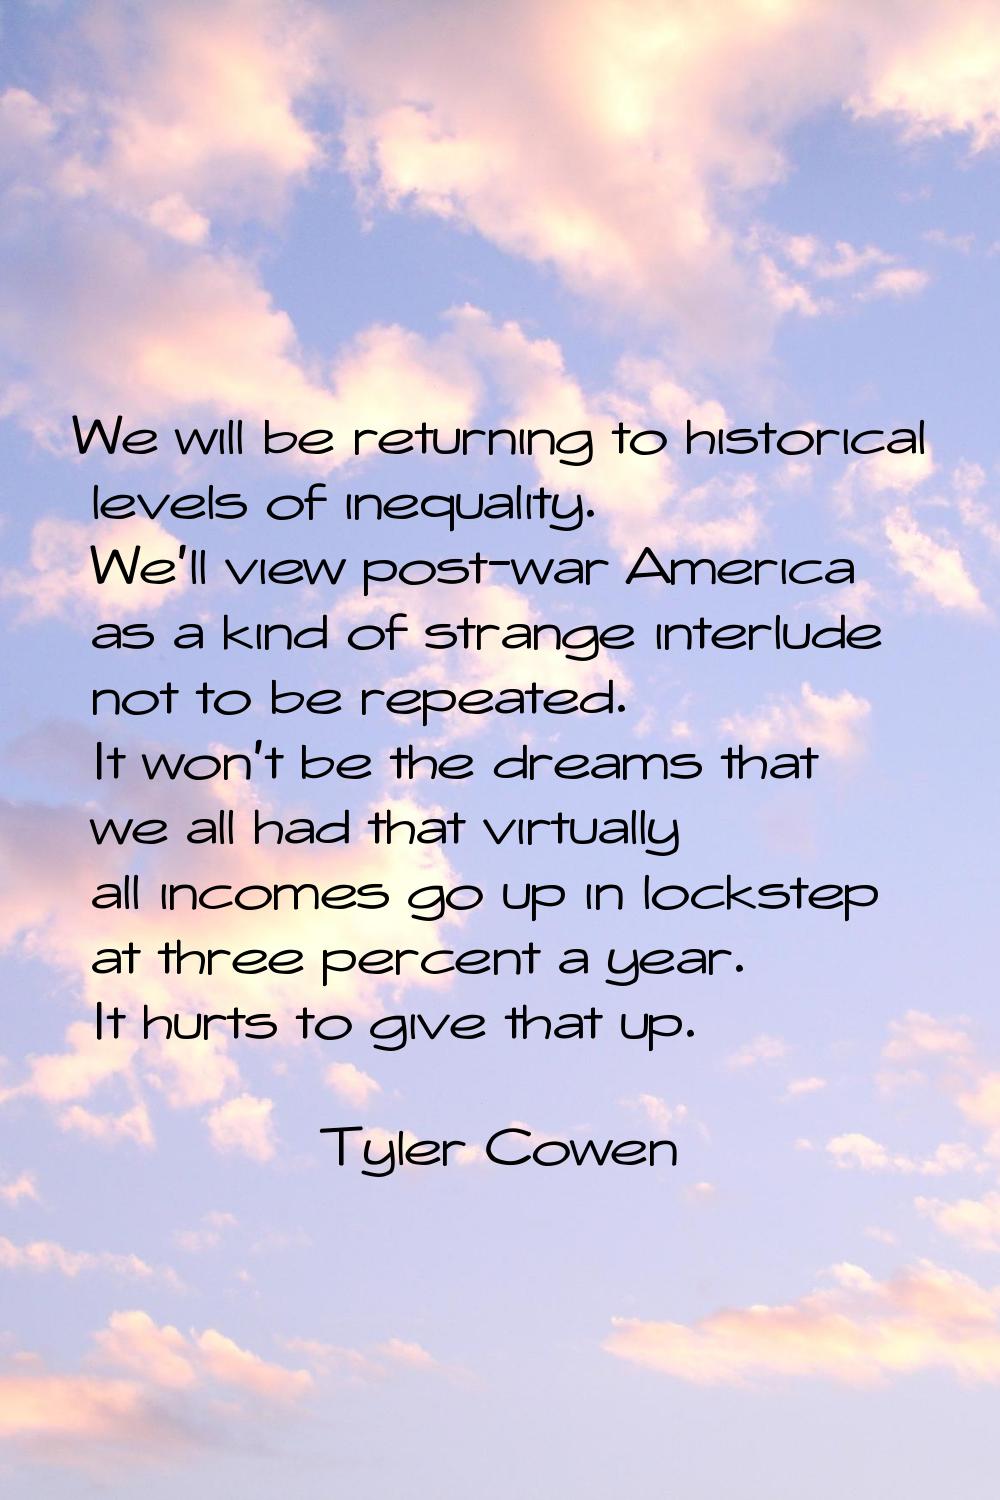 We will be returning to historical levels of inequality. We'll view post-war America as a kind of s